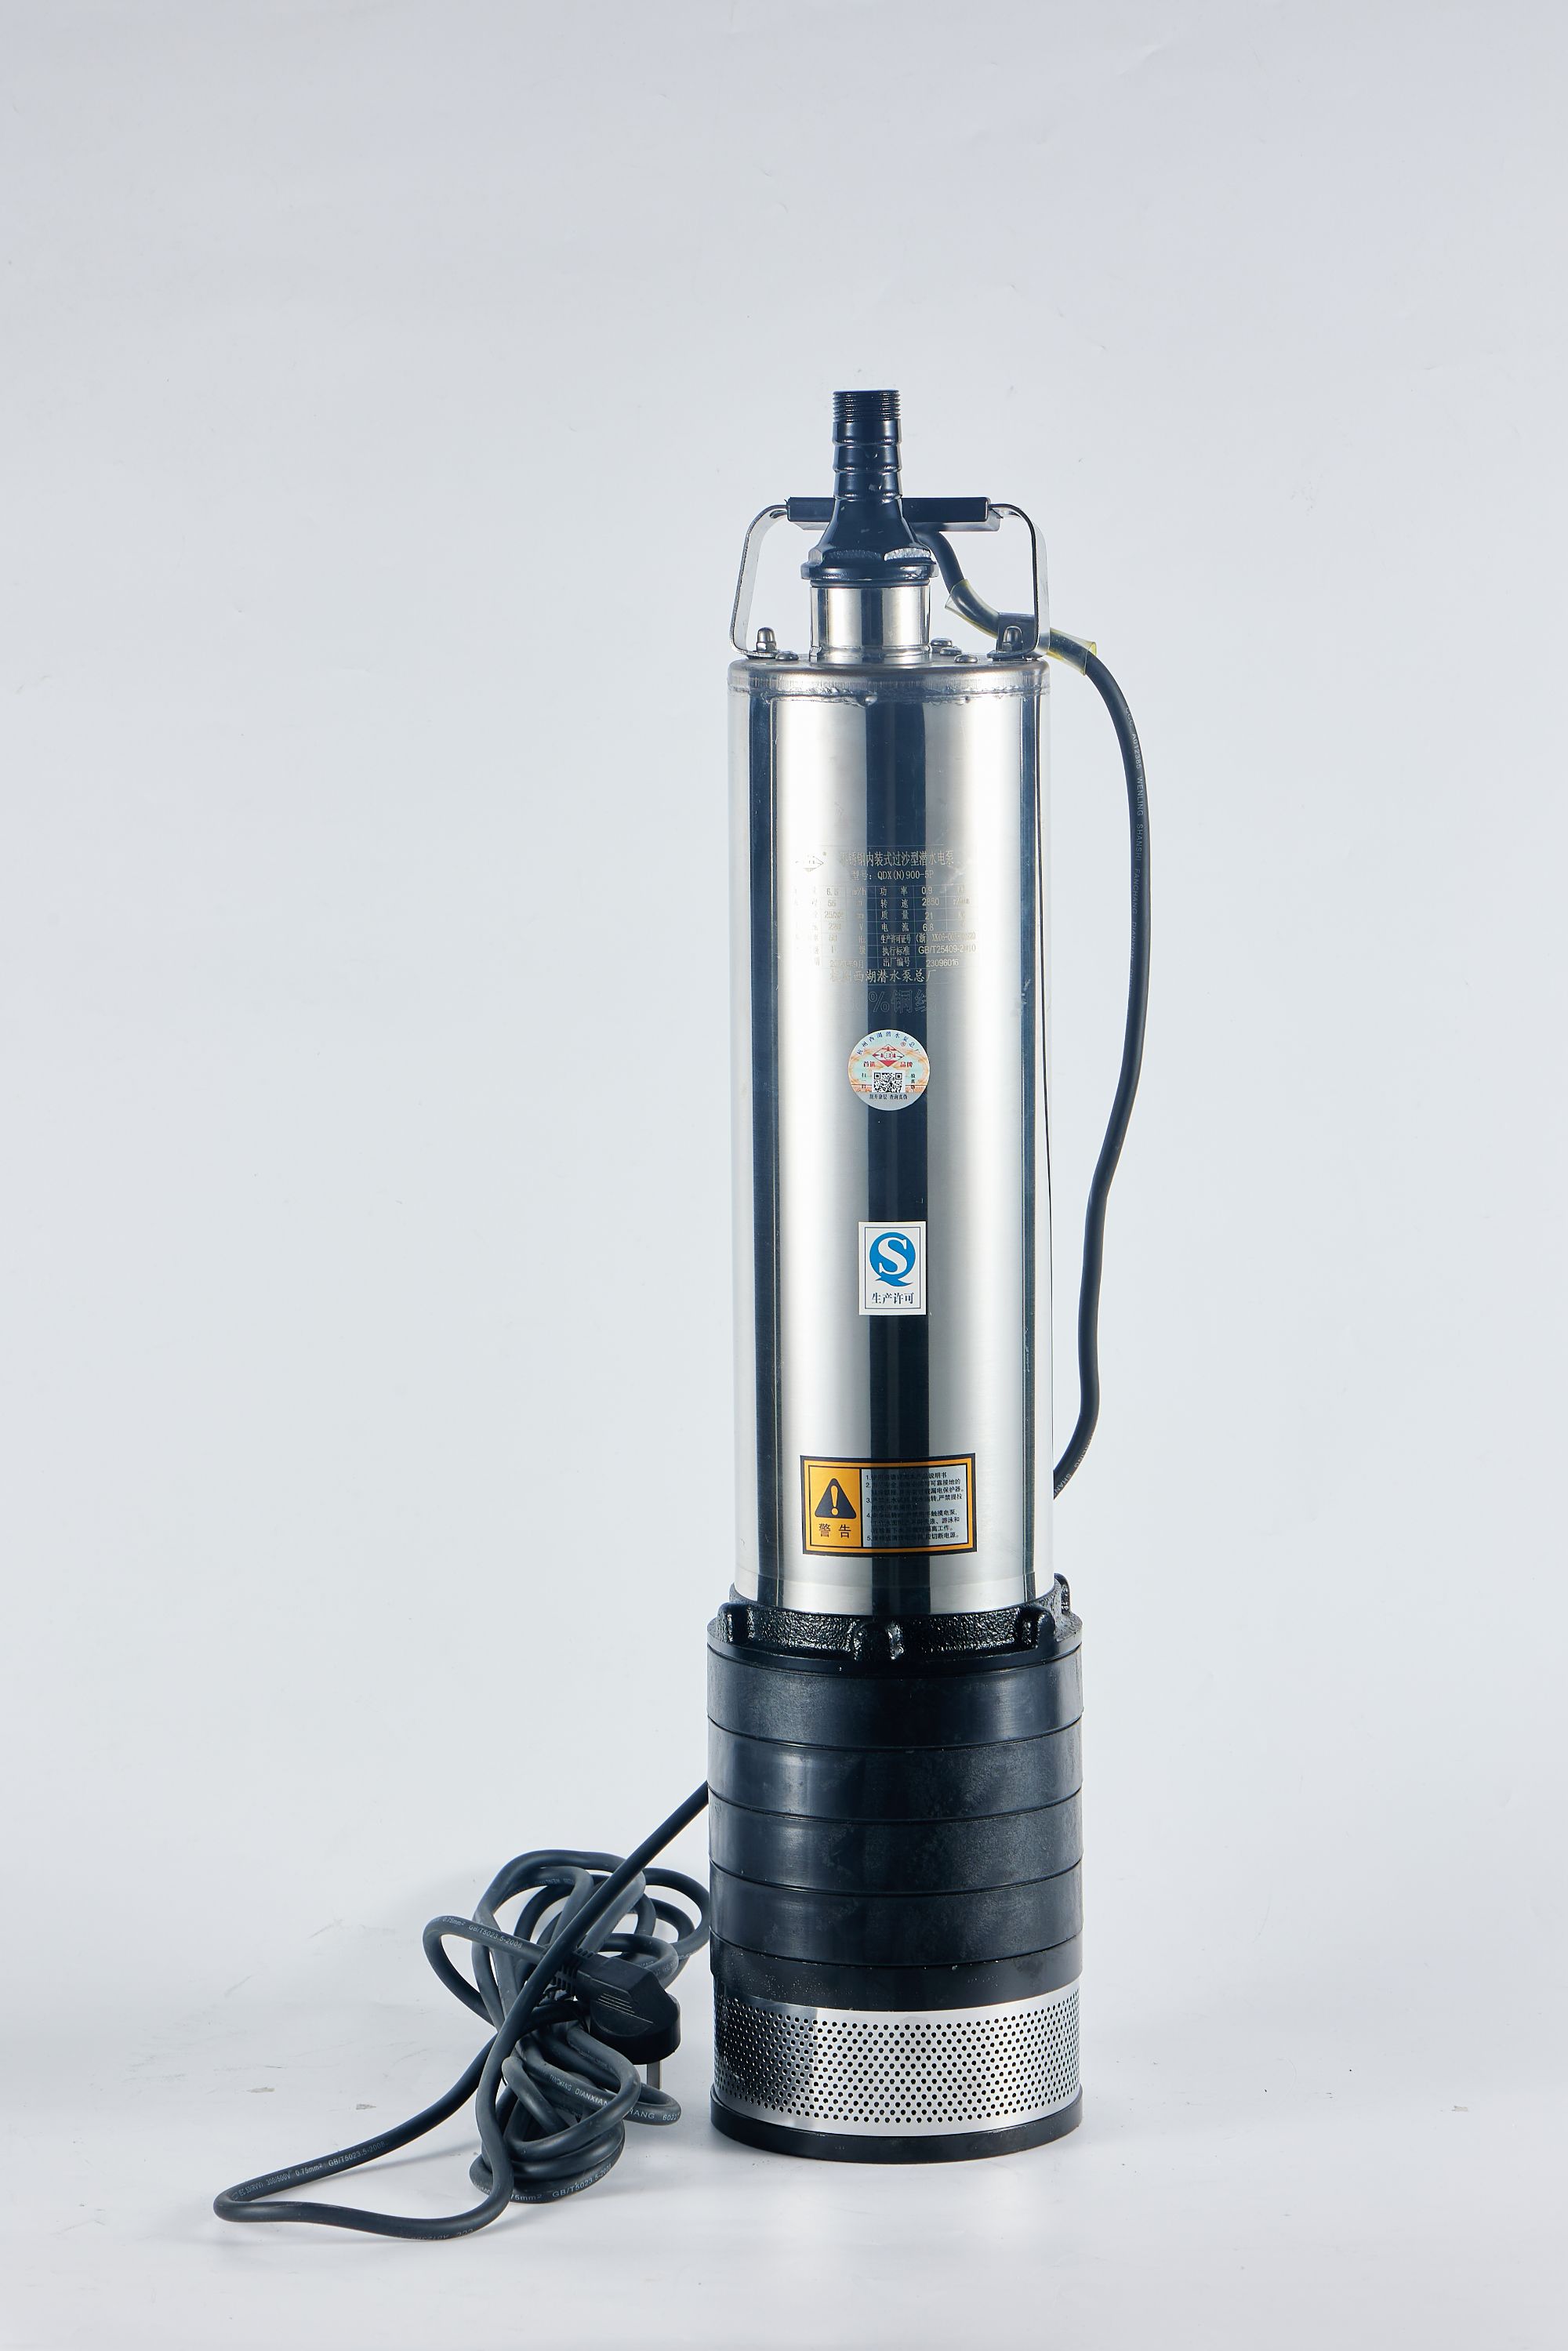 220V 1 HP POWER SINGLE-PHASE Submersible Pump - Stainless Steel Water Pump for Well and high pressure